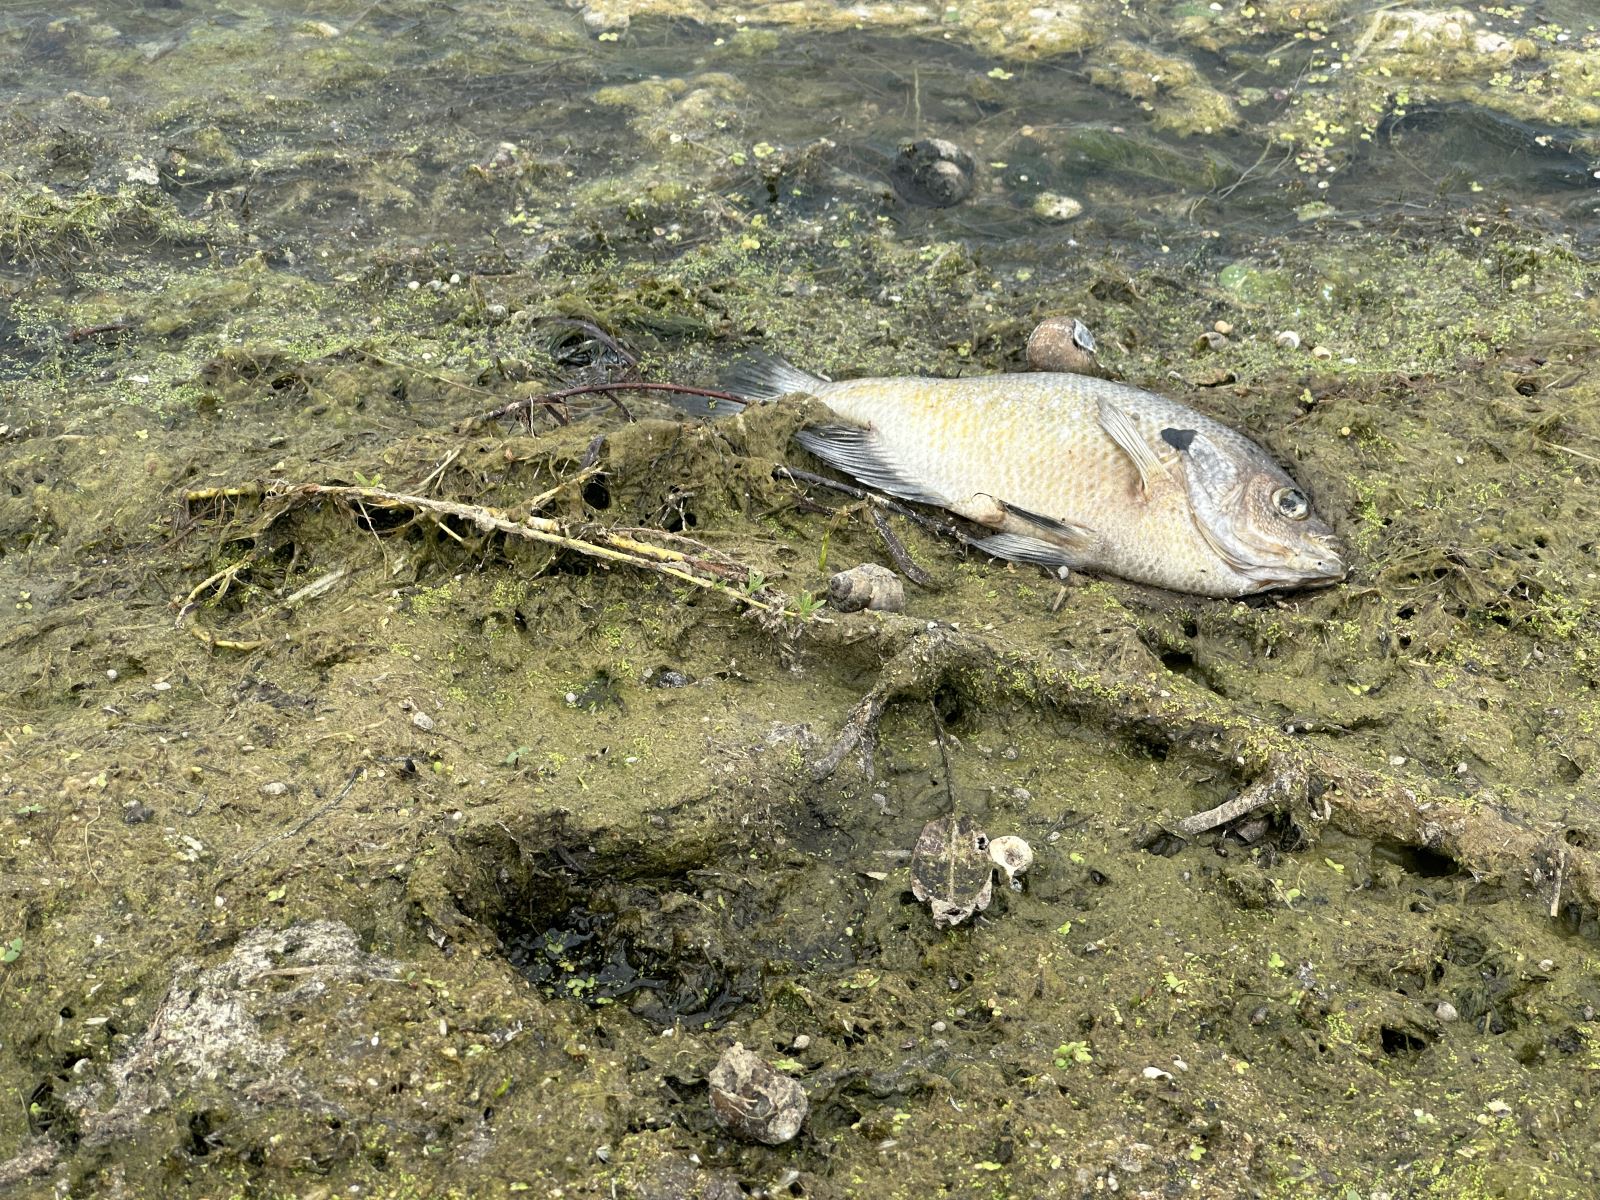 Dead fish surrounded by green algae on shore of Brushy Creek beach